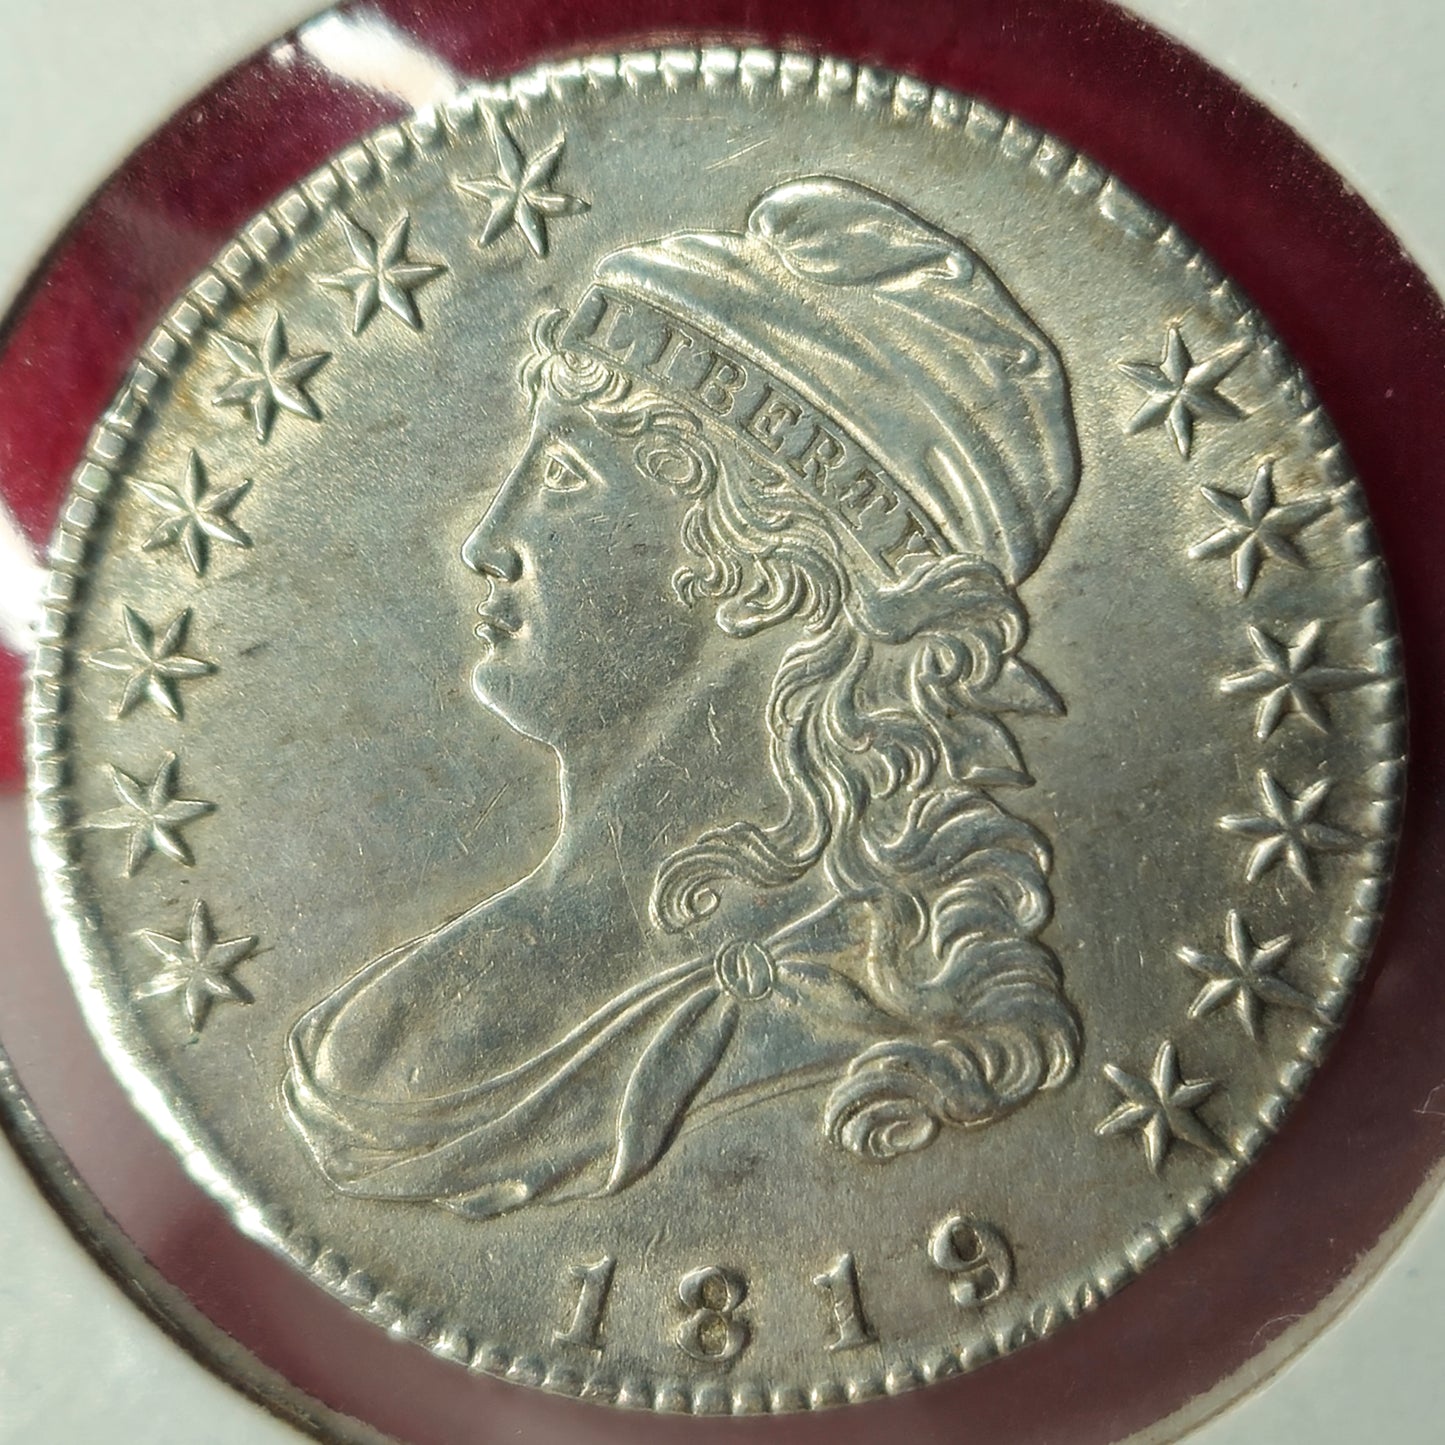 1819-P Capped Bust Half Dollar Ungraded Almost Uncirculated  A Stunning Lettered Edge Coin!!